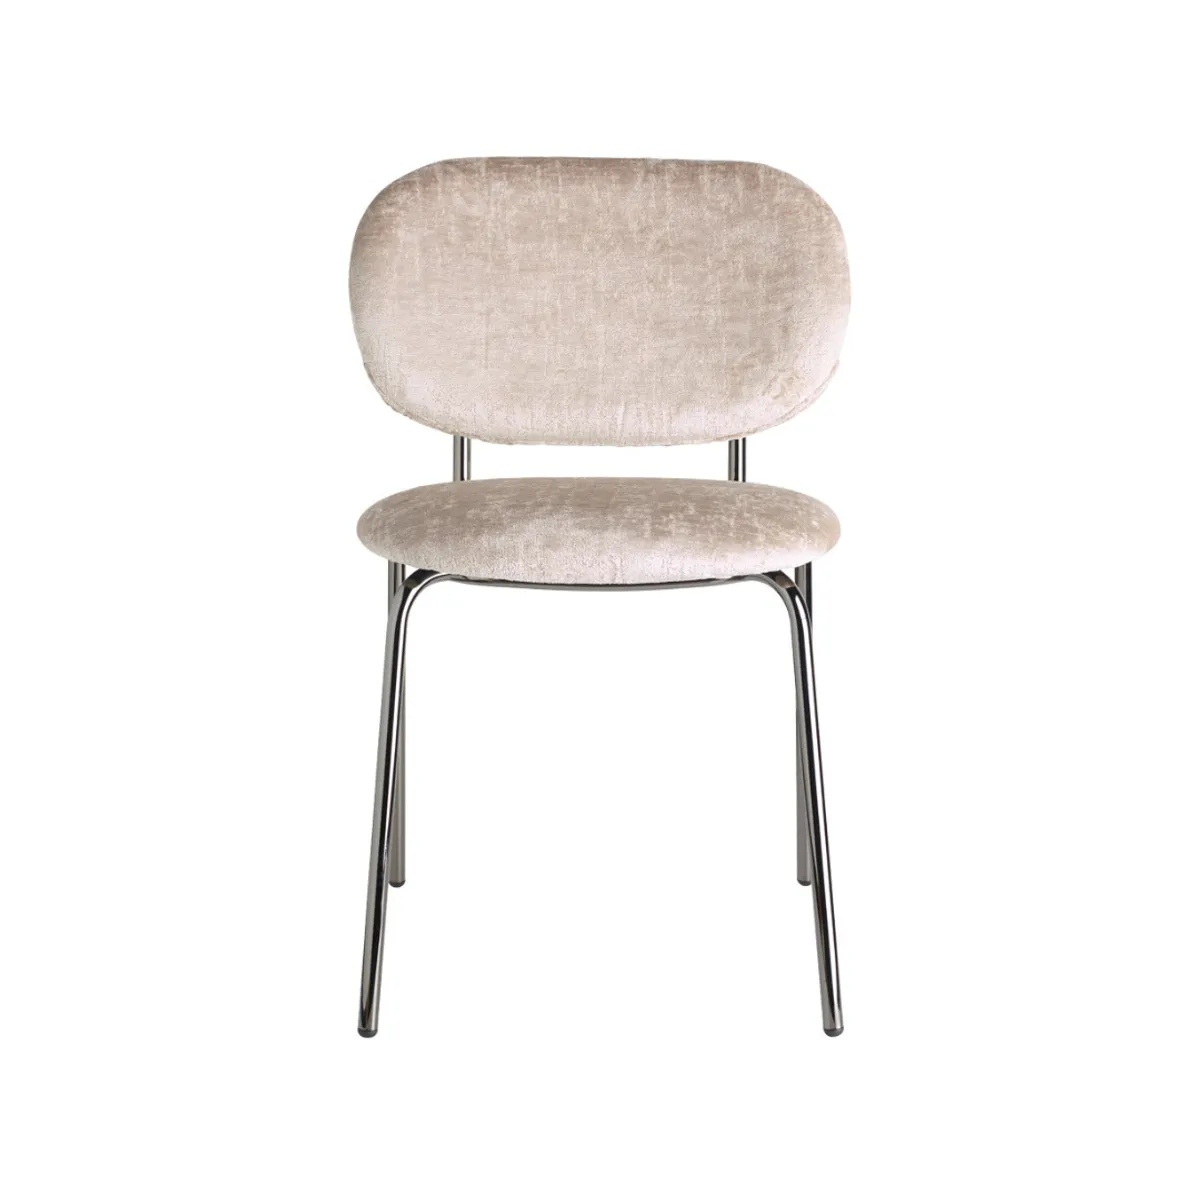 Layla soft side chair 10